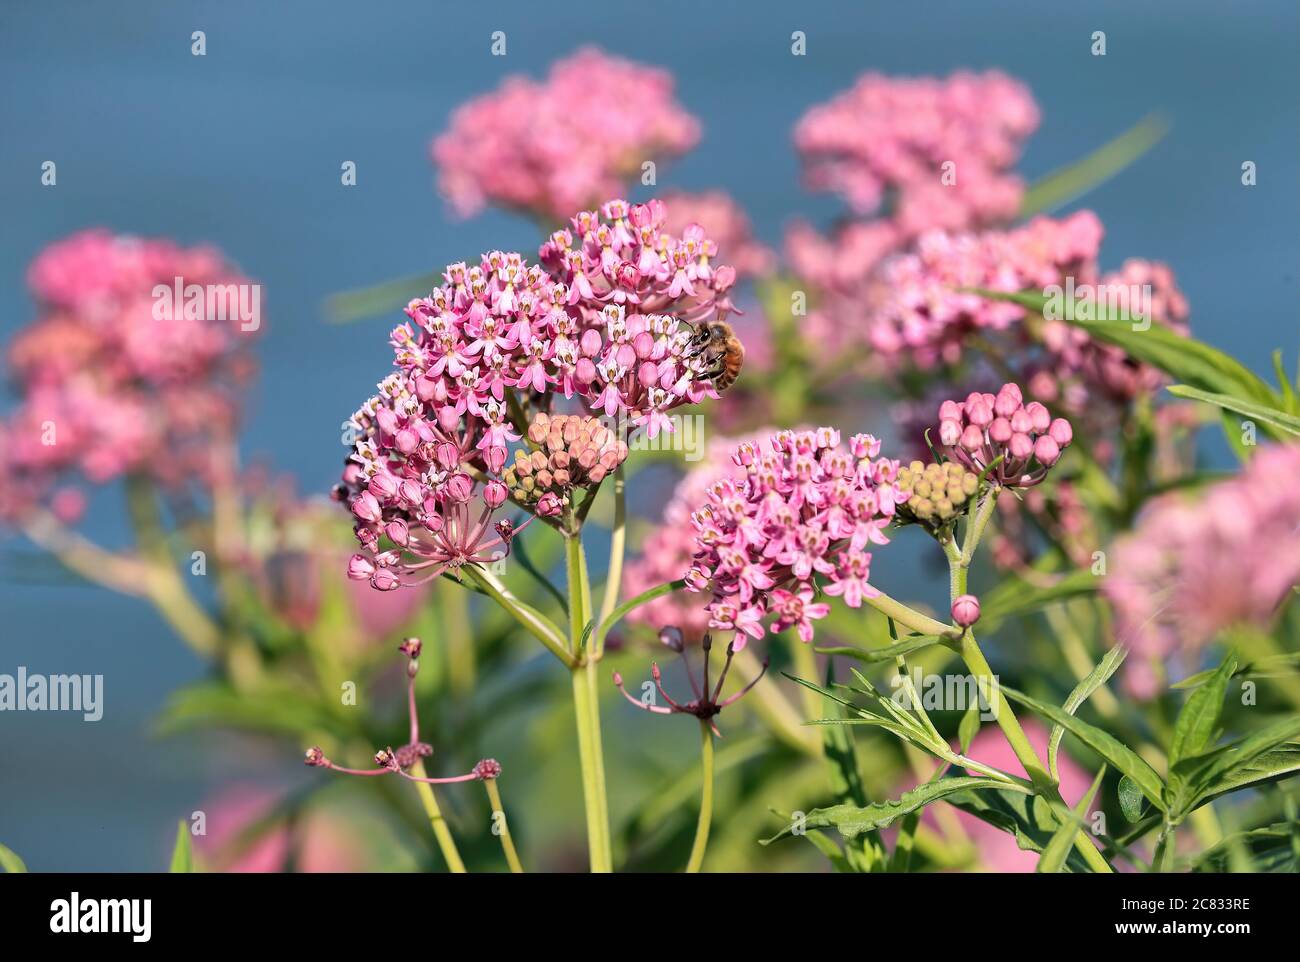 A Swamp Milkweed plant with multiple flower clusters found by a lake shore with a pollinating Honey Bee. Stock Photo